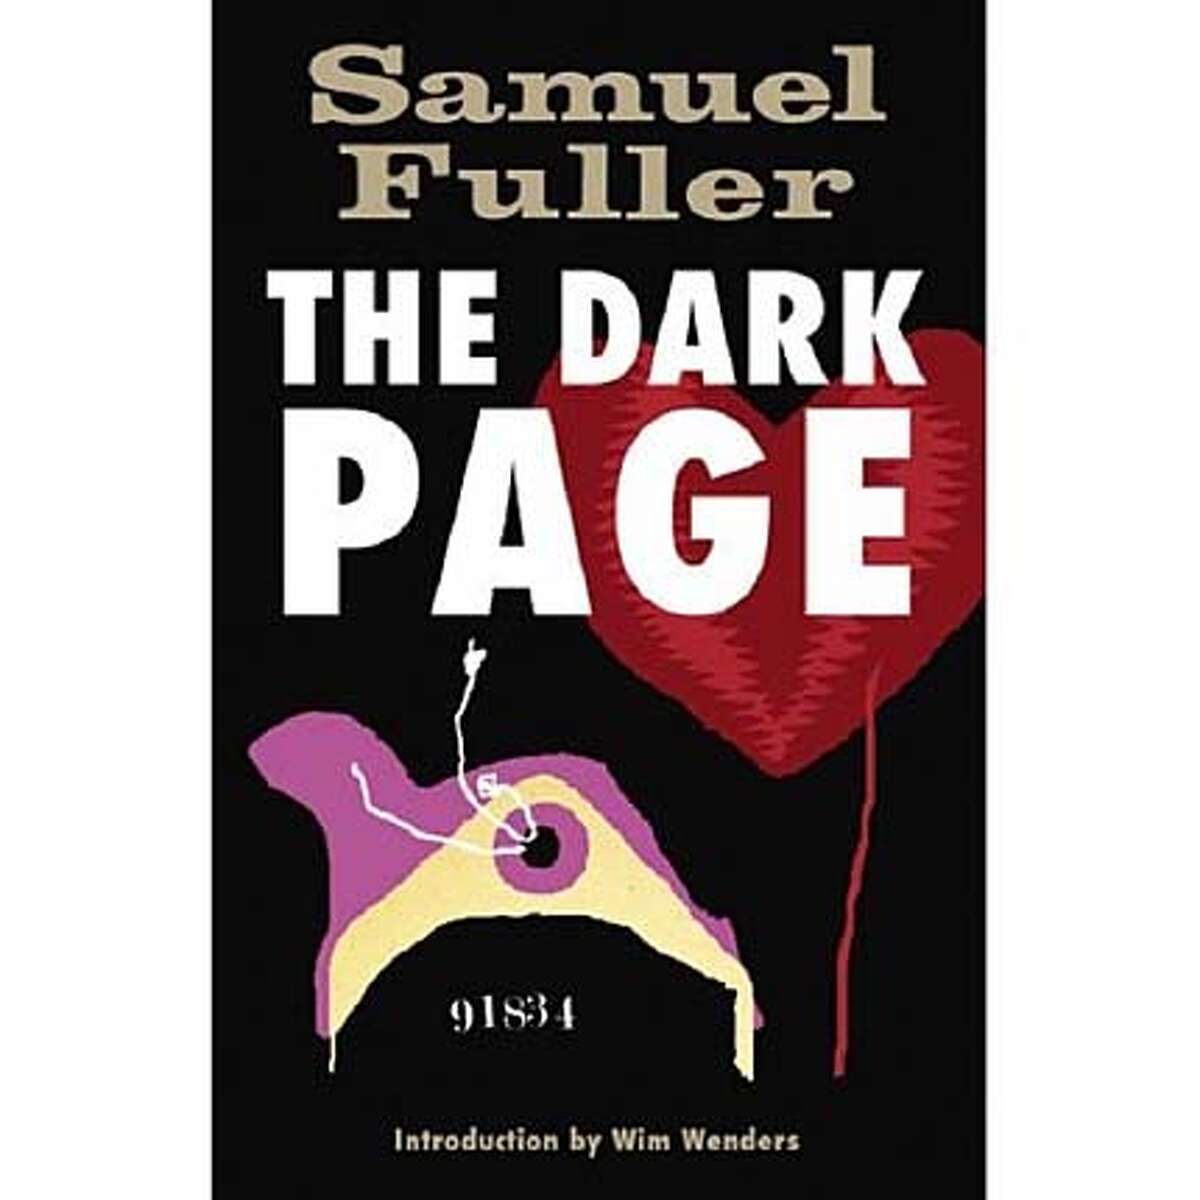 "The Dark Page" by Samuel Fuller